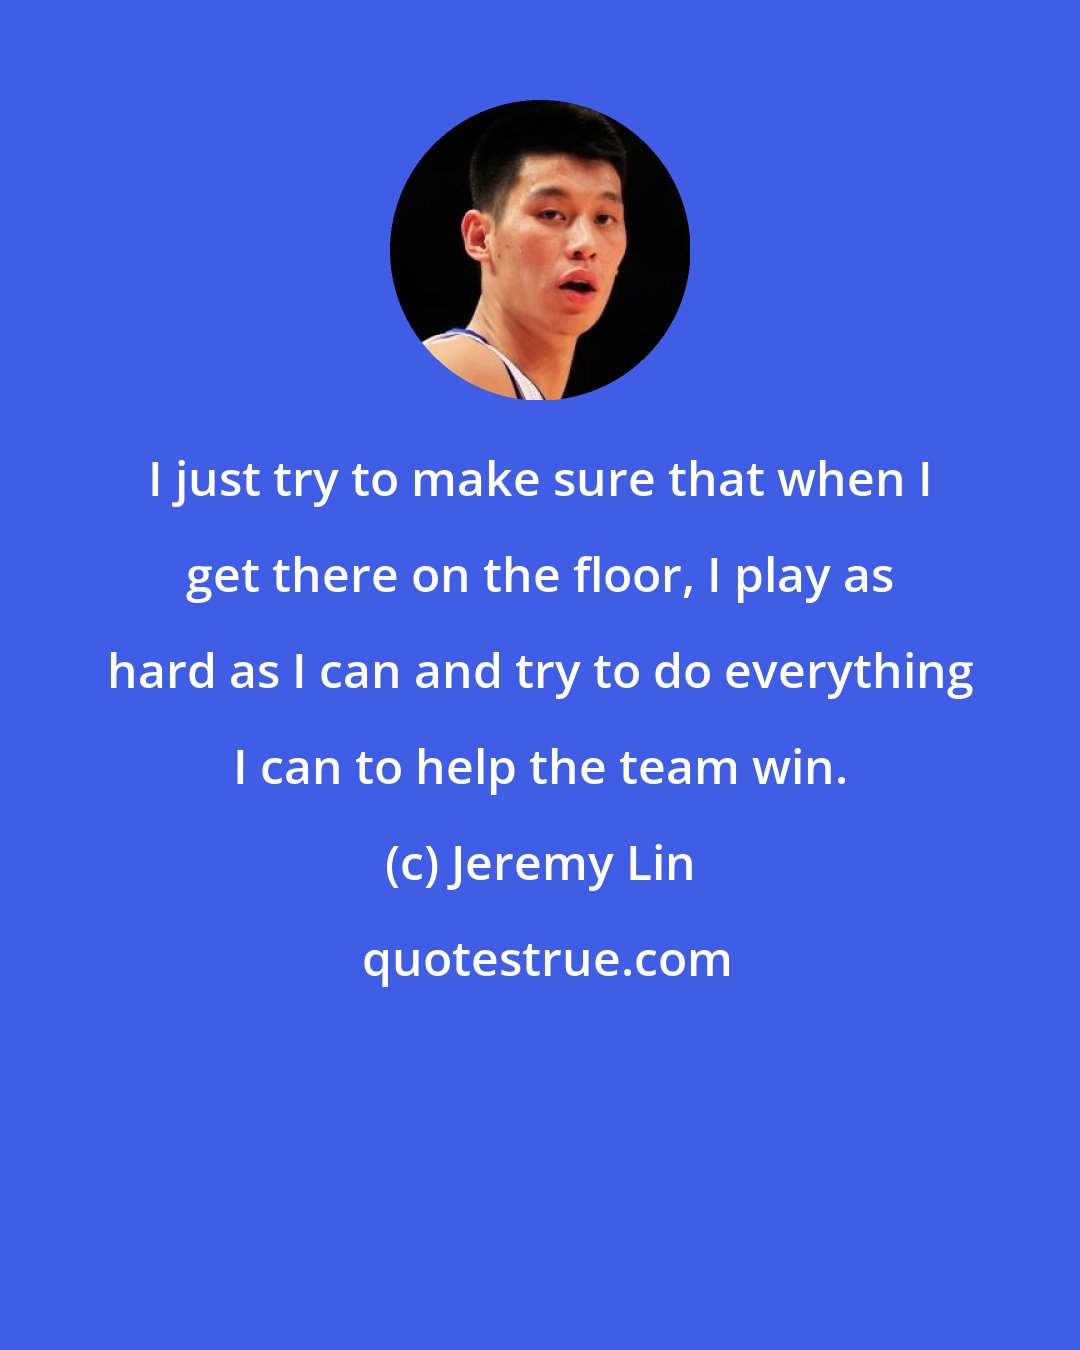 Jeremy Lin: I just try to make sure that when I get there on the floor, I play as hard as I can and try to do everything I can to help the team win.